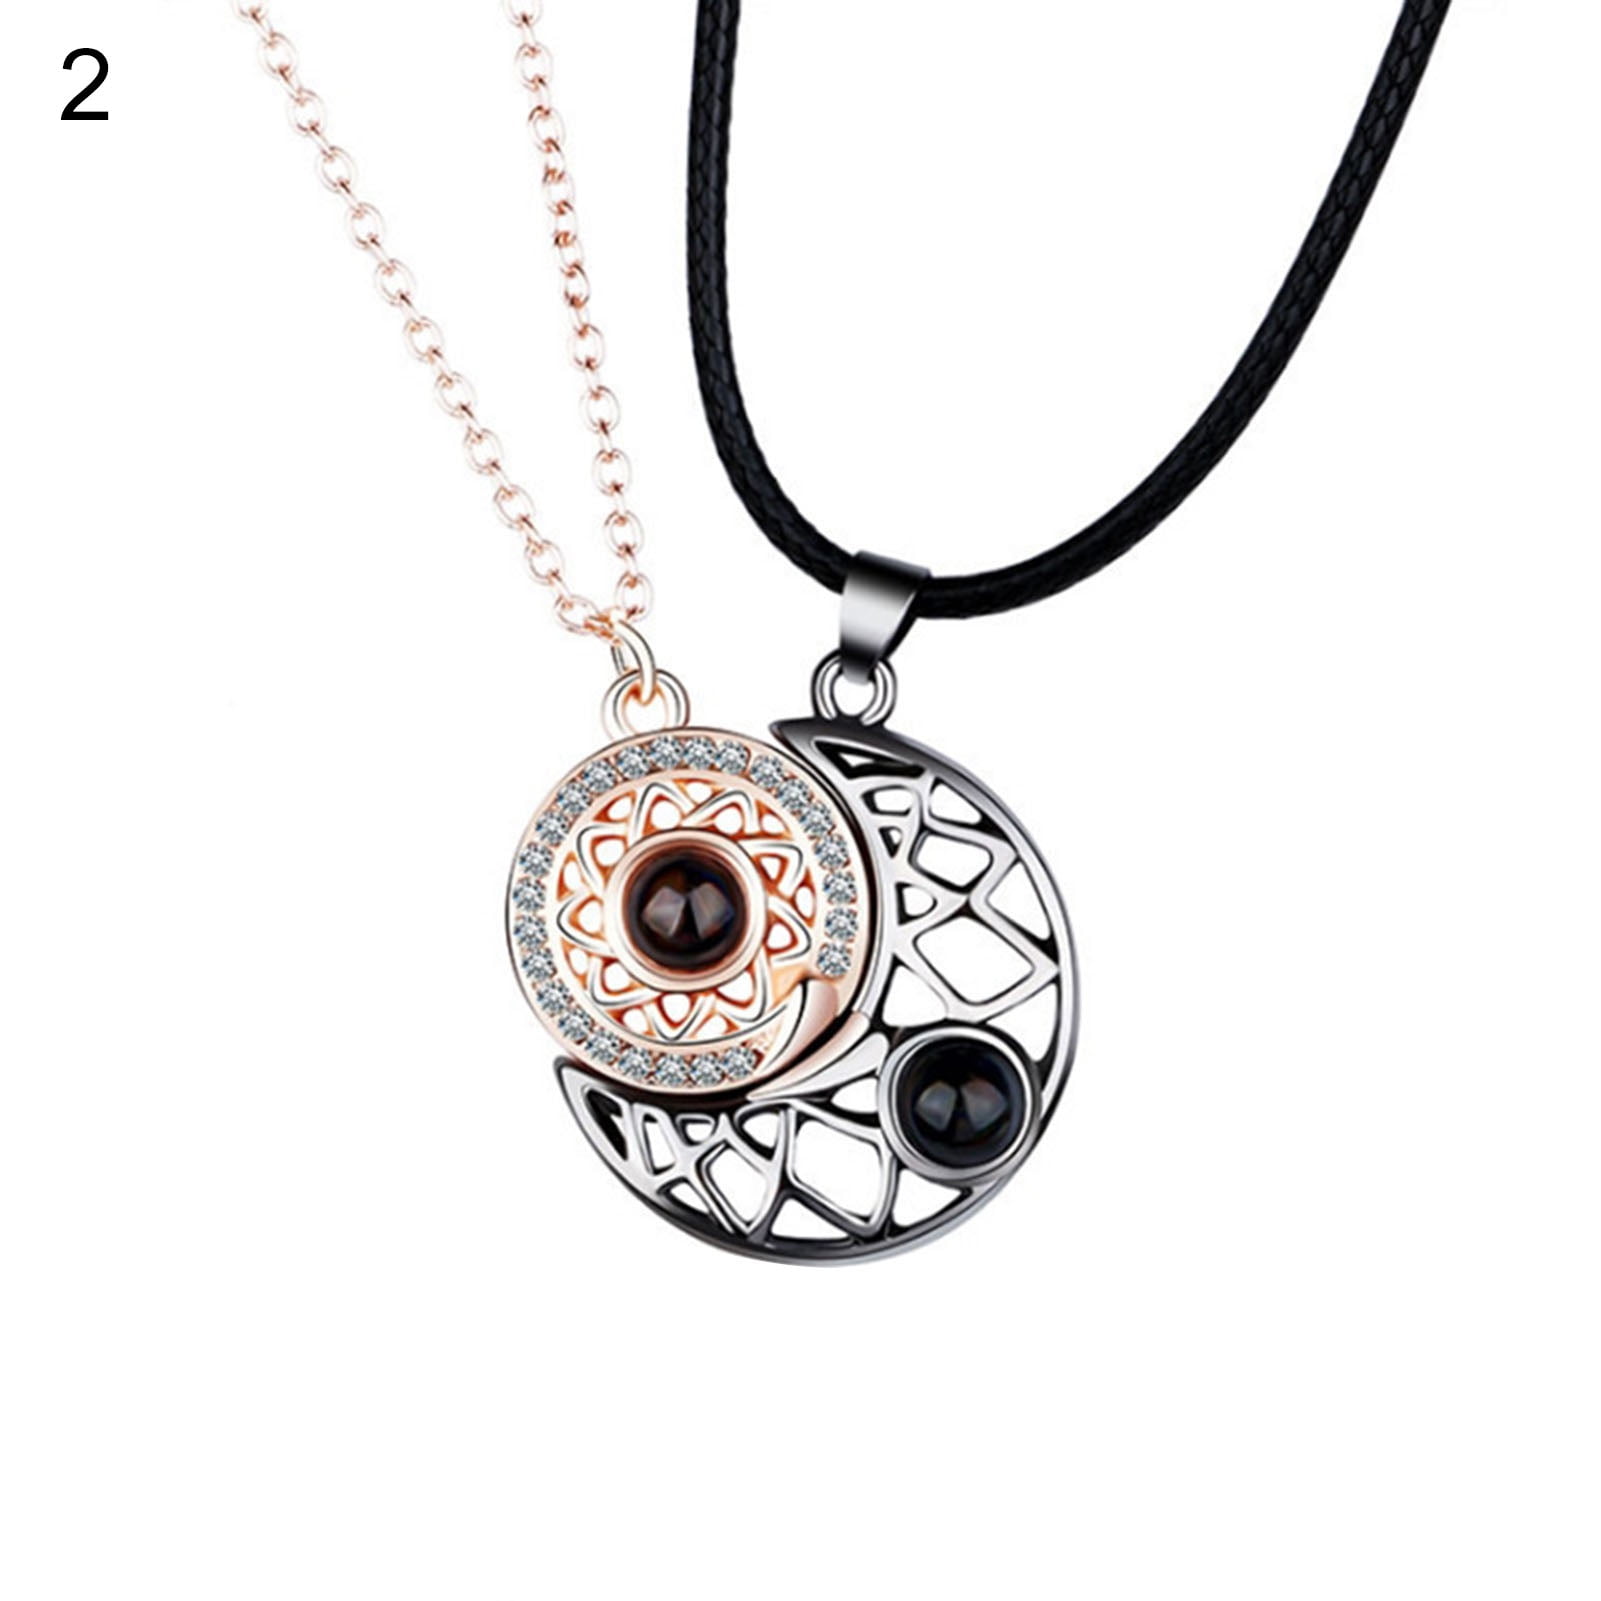 Udiyo 1 Pair Matching Necklace Magnetic Sun Moon Creative His-and-hers Necklace for Gift, Men's, Size: One size, 2#